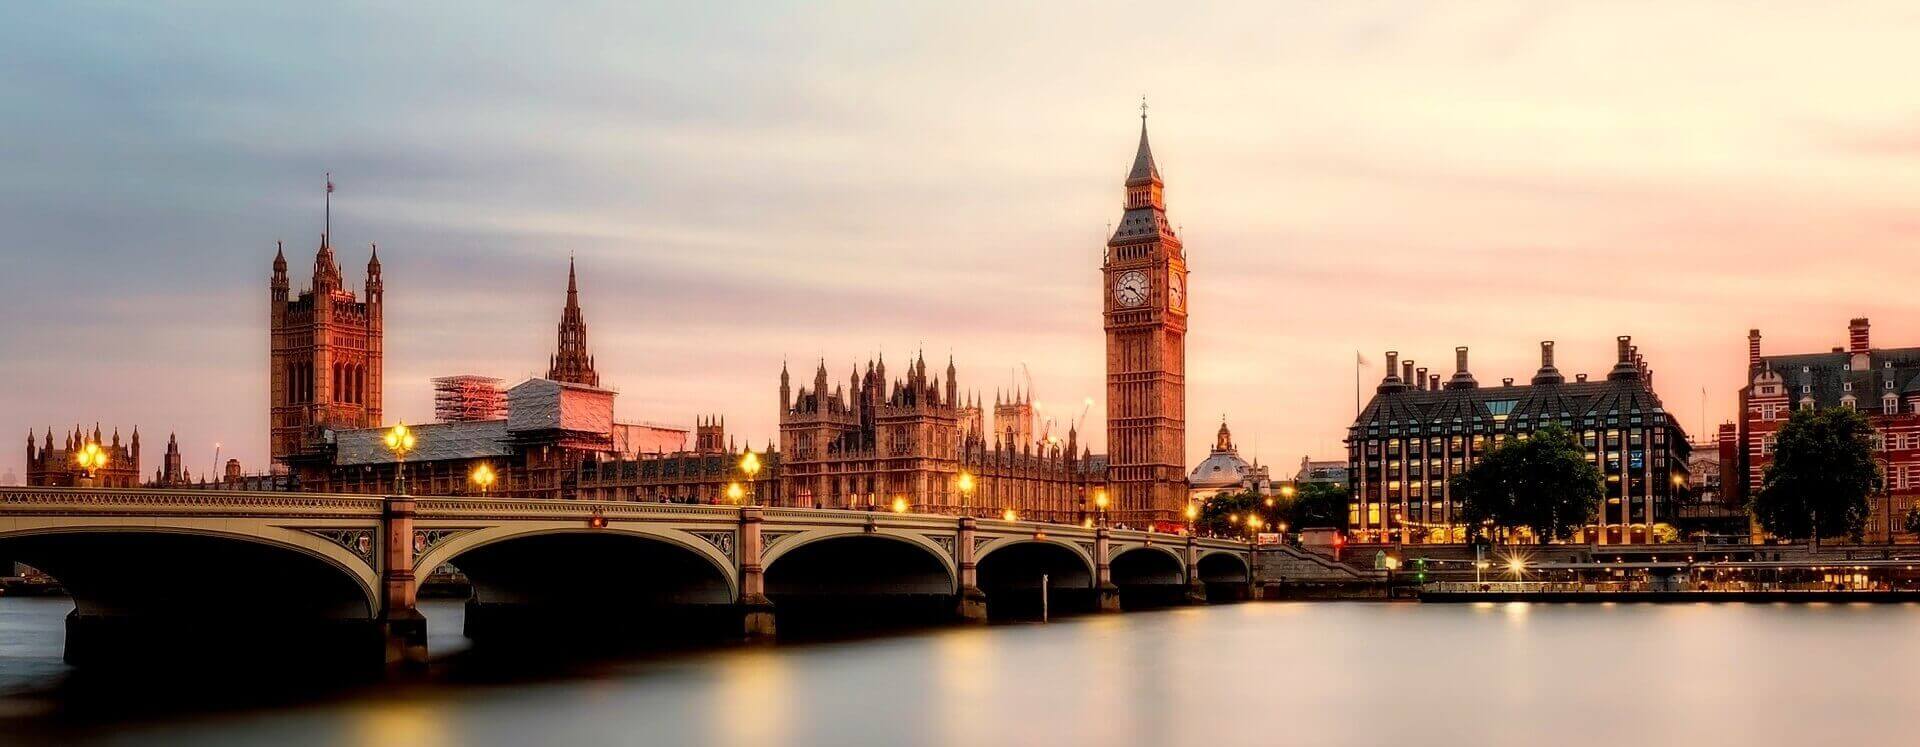 Things to do in United Kingdom London Big Ben clock tower | FlyCheapAlways